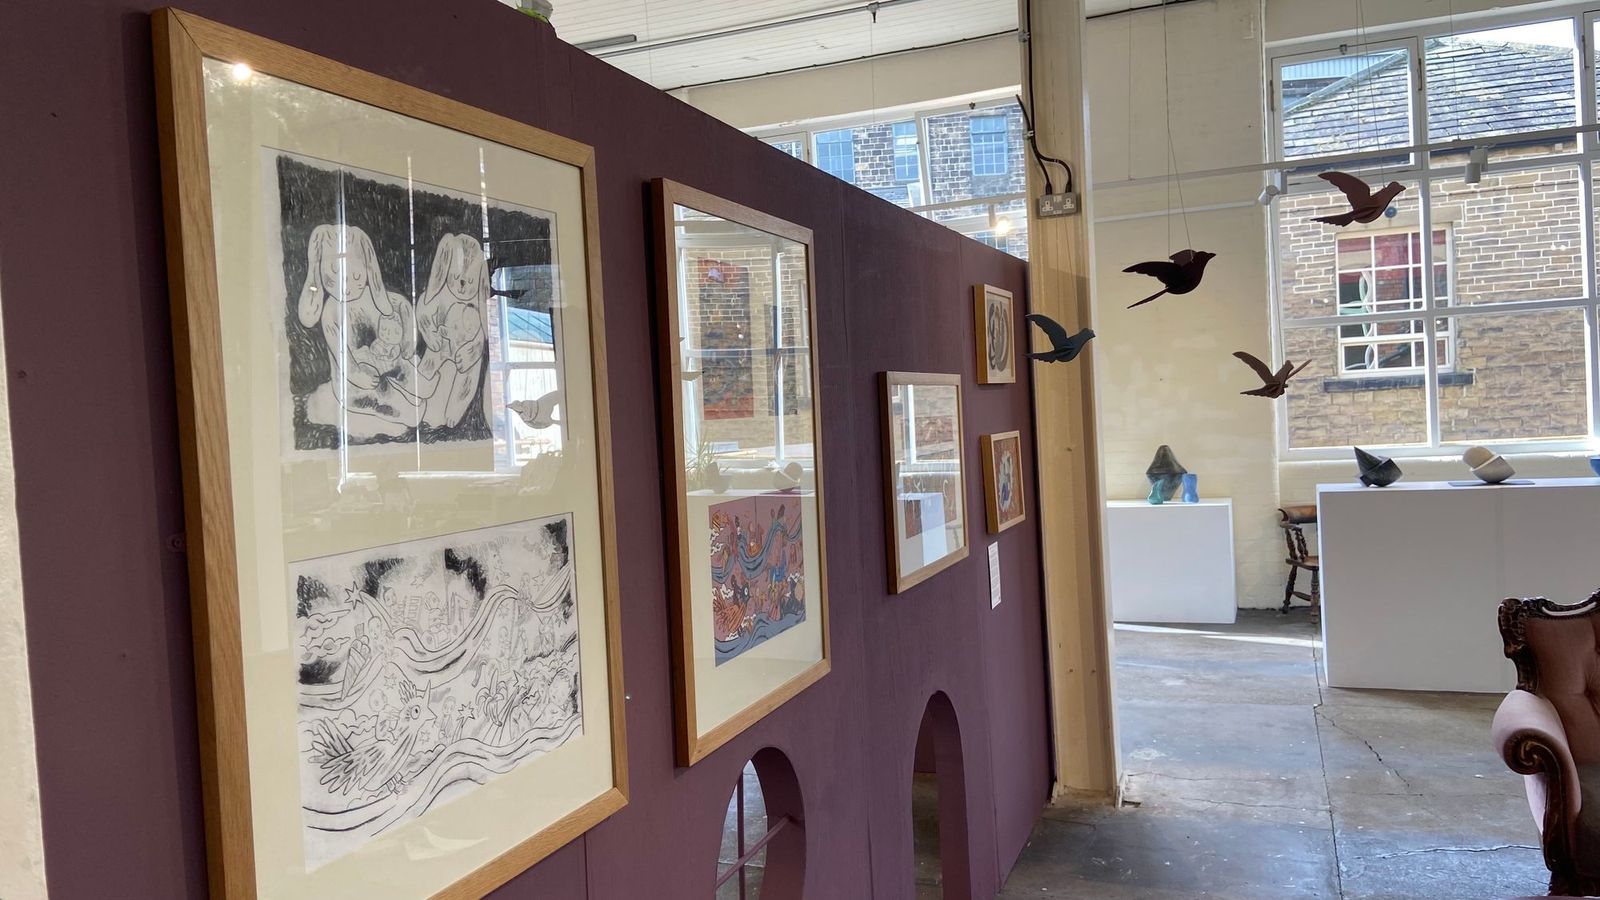 Sunny Bank Mills hosts exhibition about giving birth in lockdown